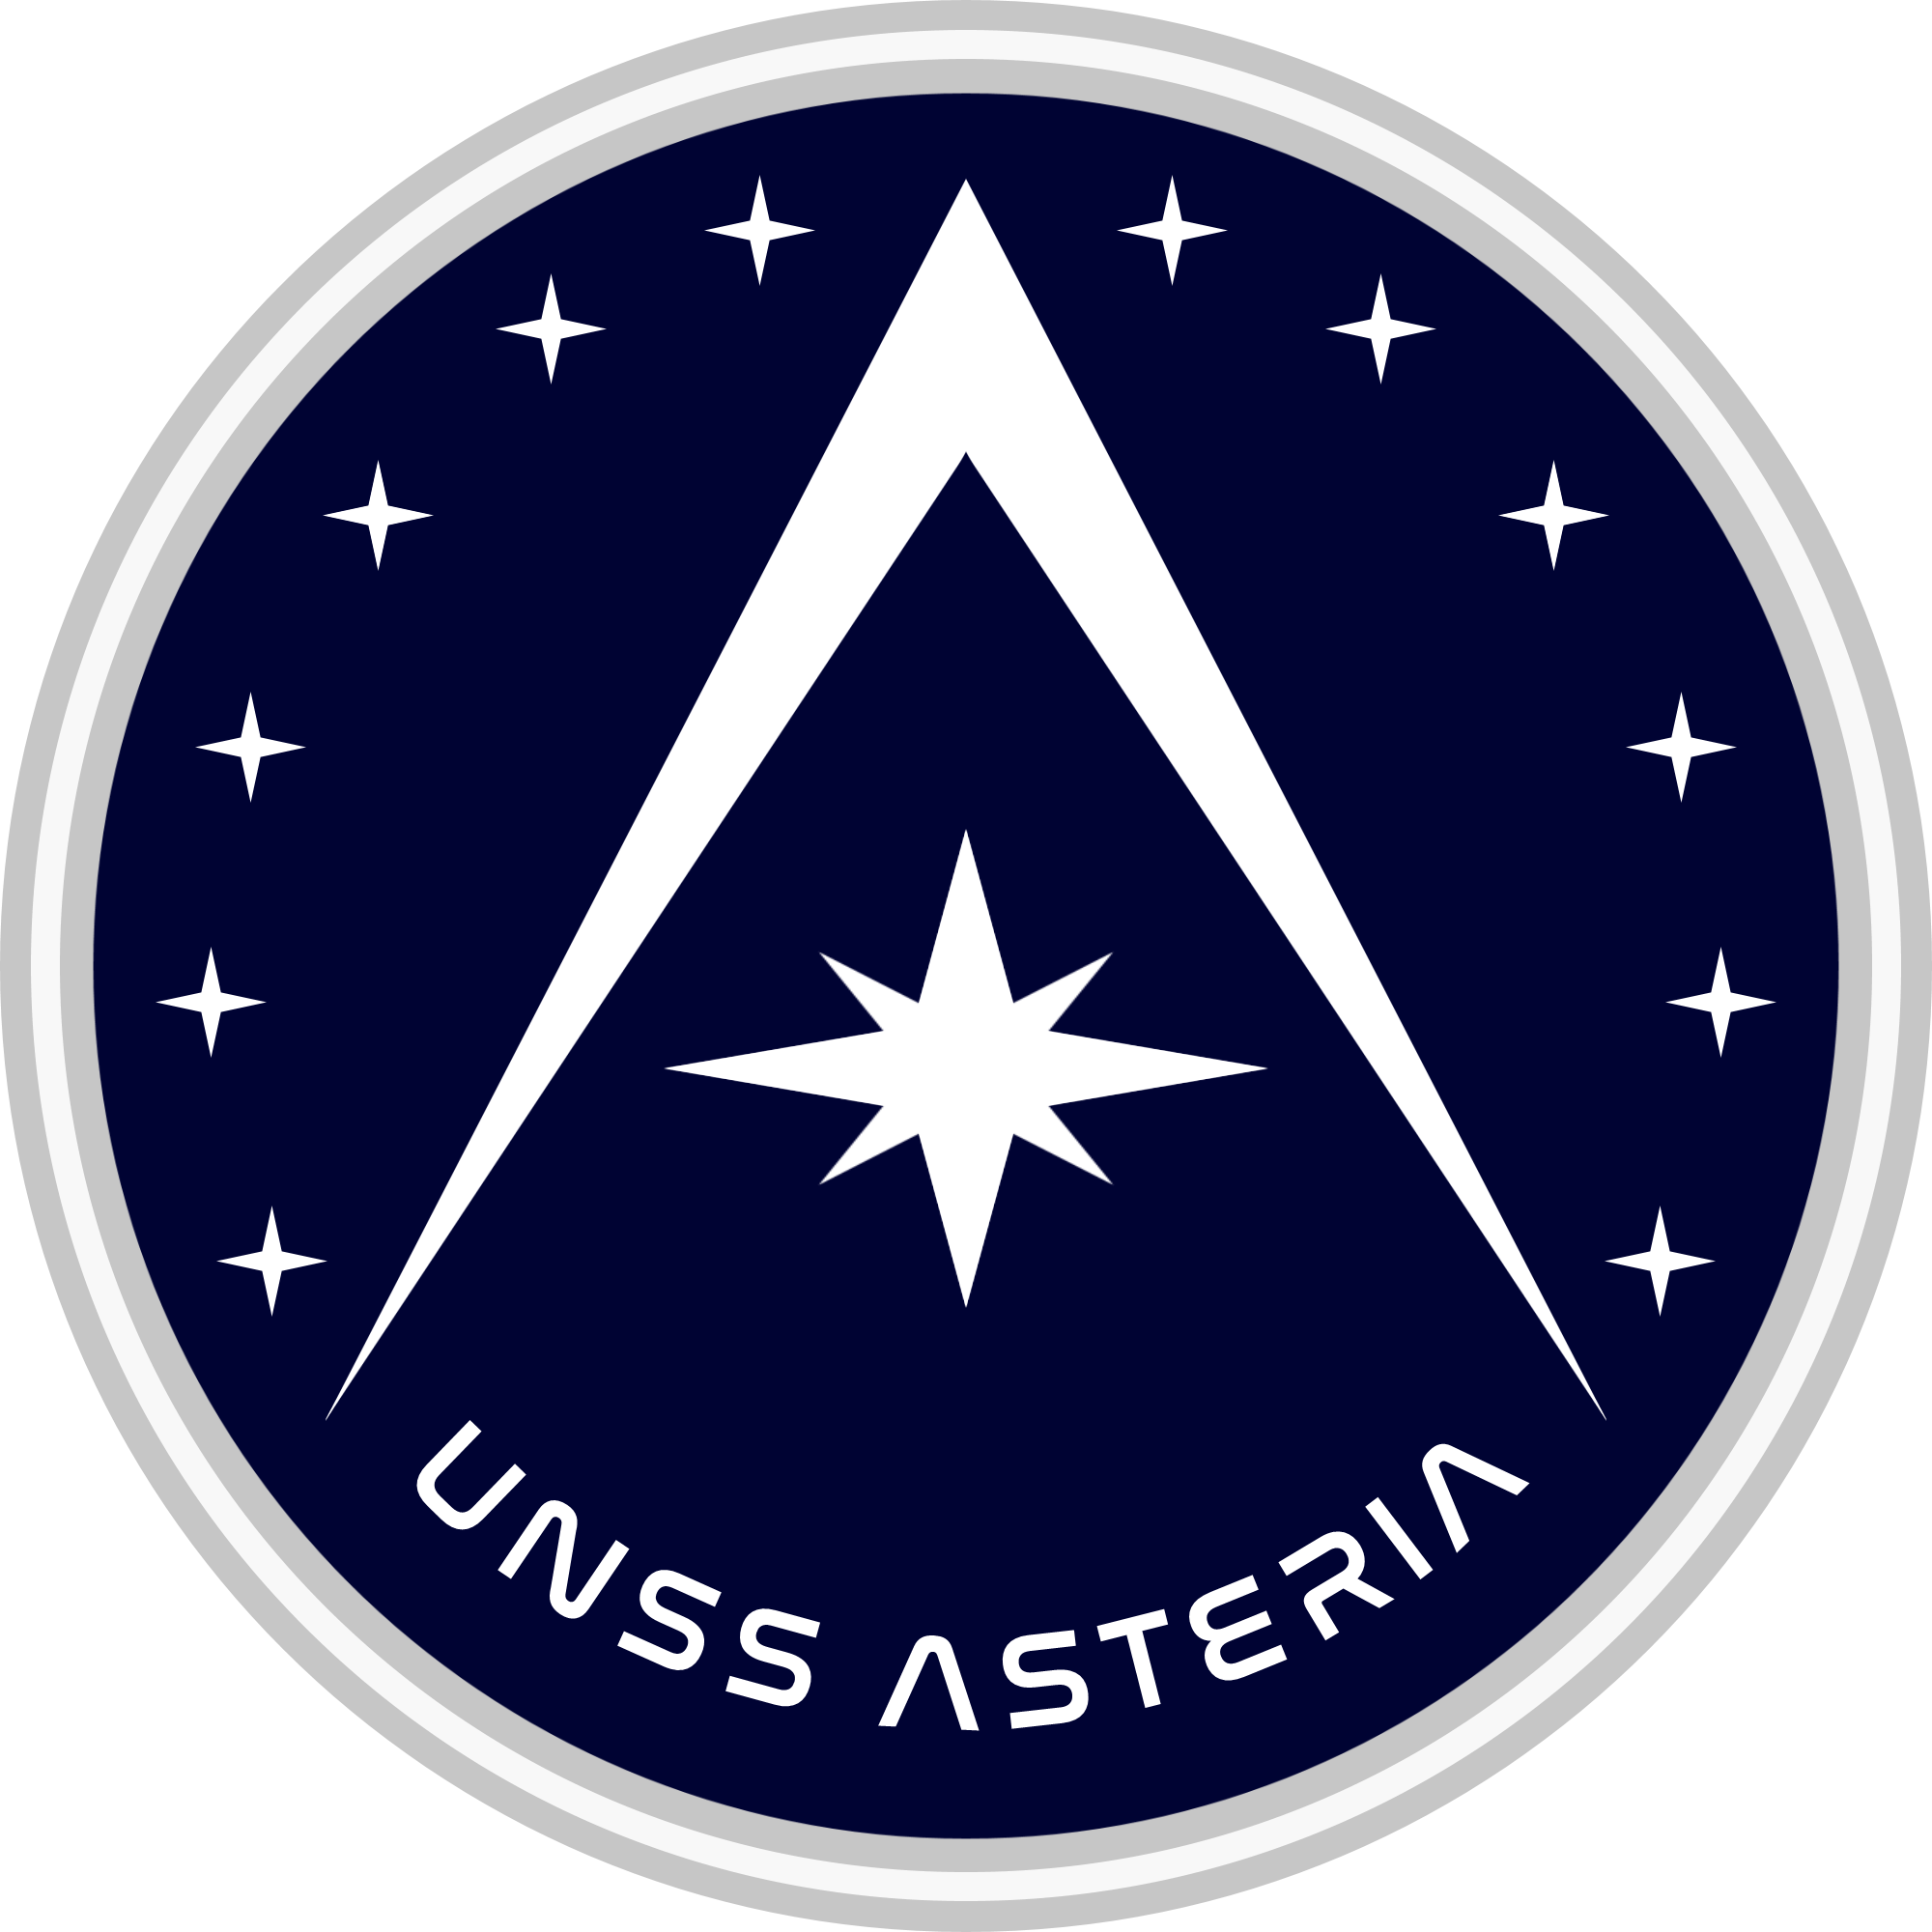 UNSS Asteria Crew Patch